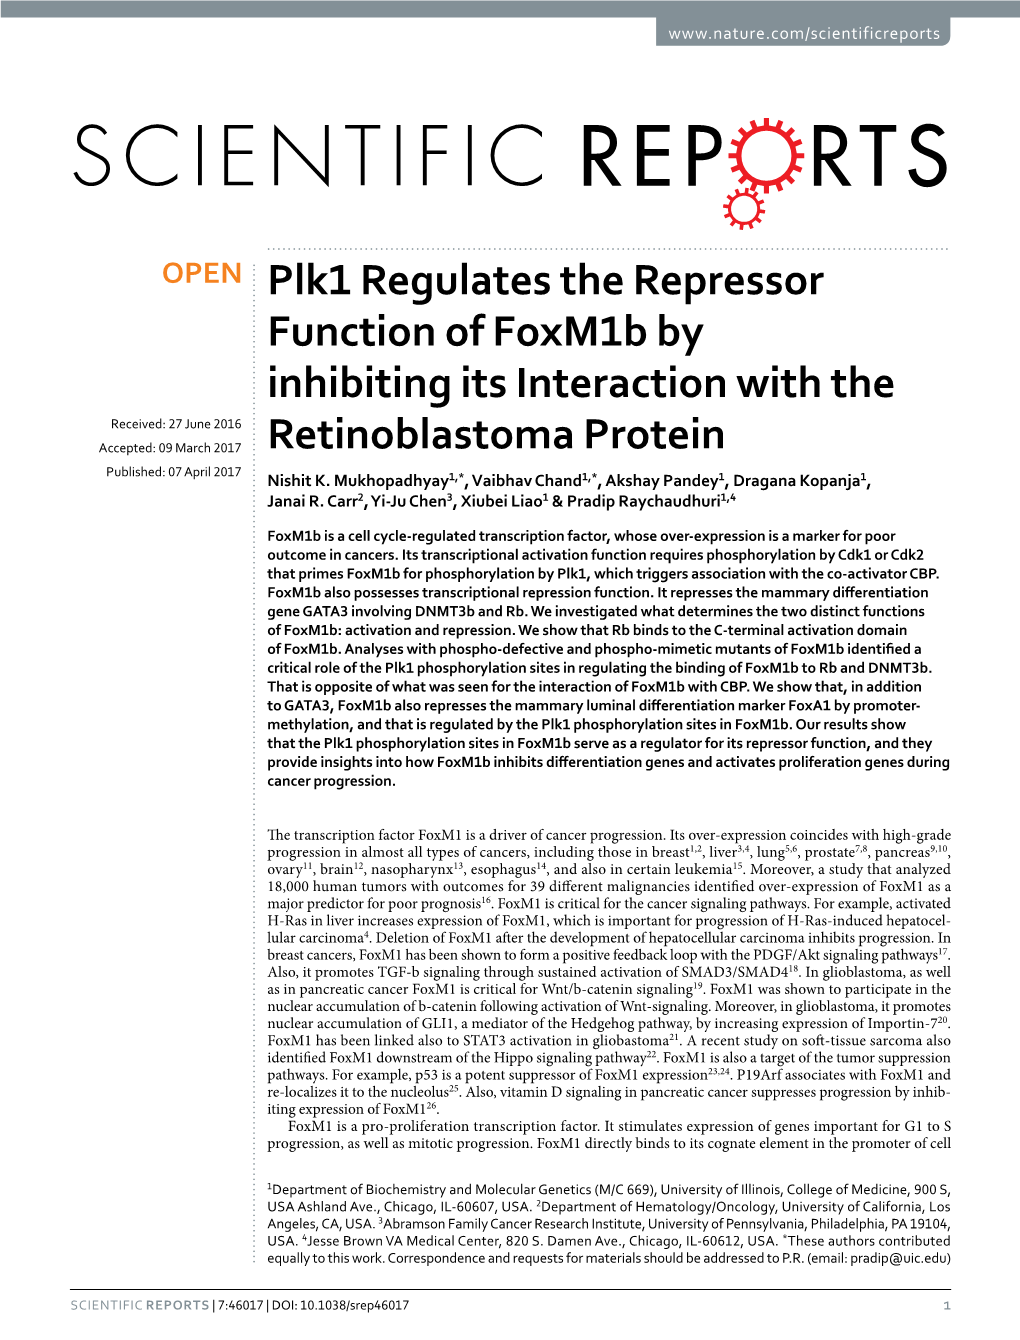 Plk1 Regulates the Repressor Function of Foxm1b by Inhibiting Its